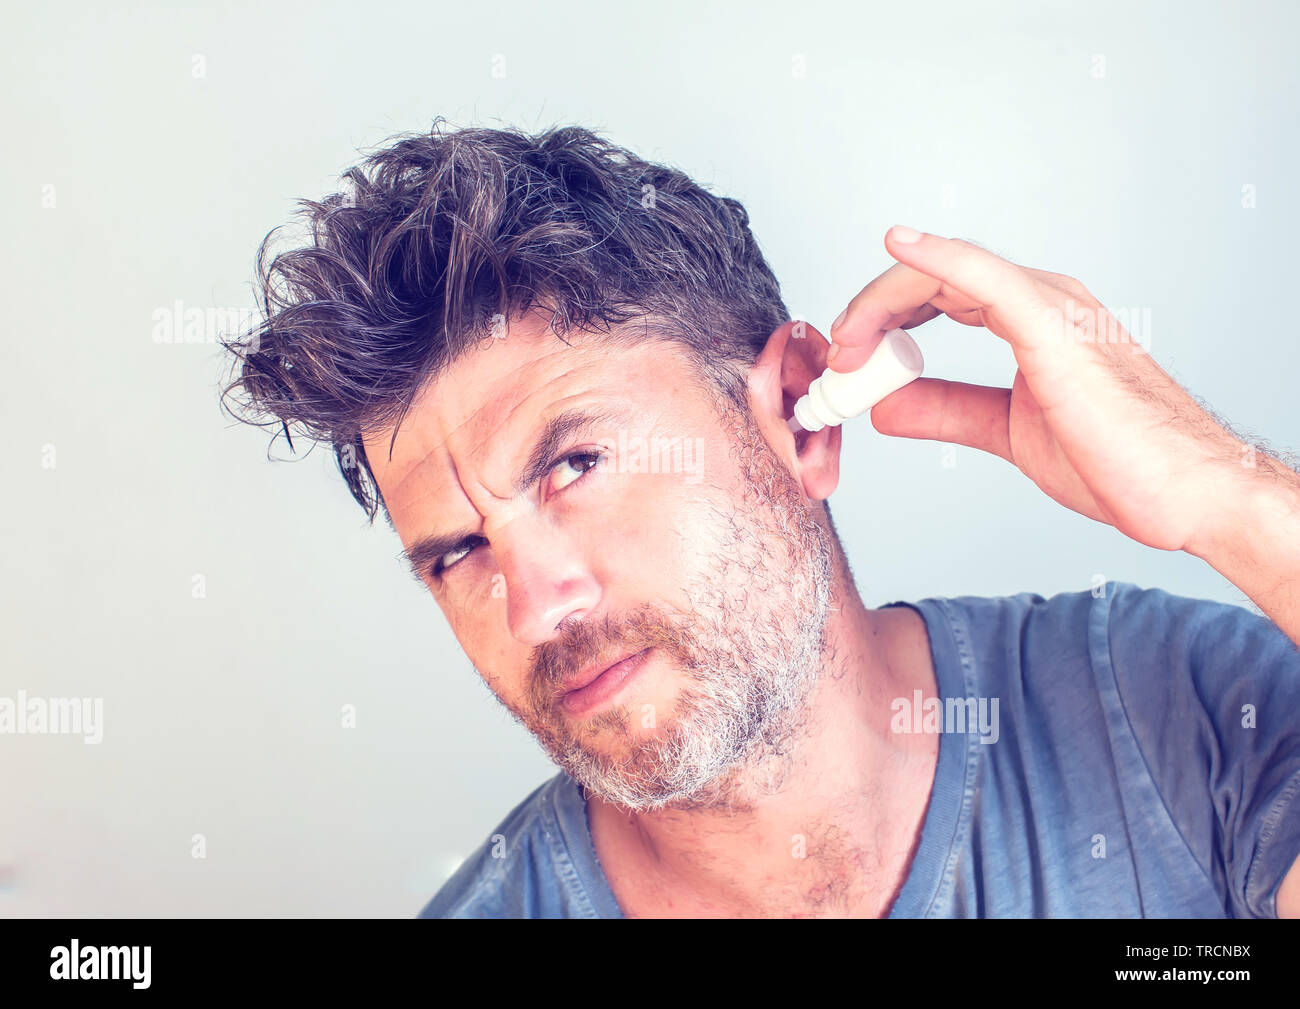 man using ear drops on gray background Stock Photo